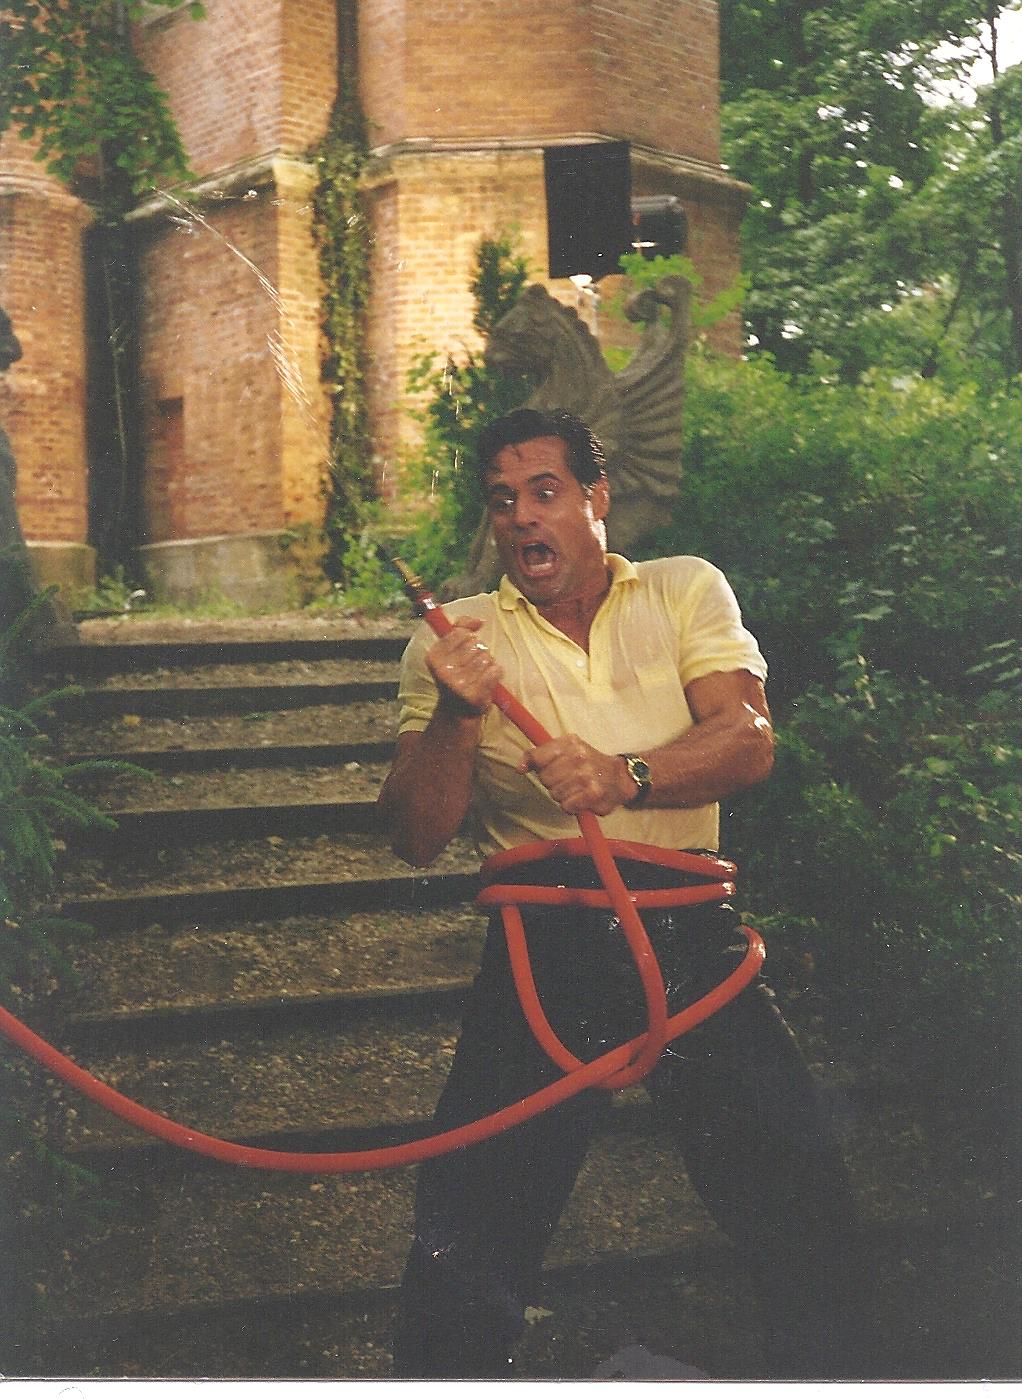 In Transylvania Romania, actor Jim Fitzpatrick (Starring as Tony) wrestles with a possessed-hose, in the children's film, 